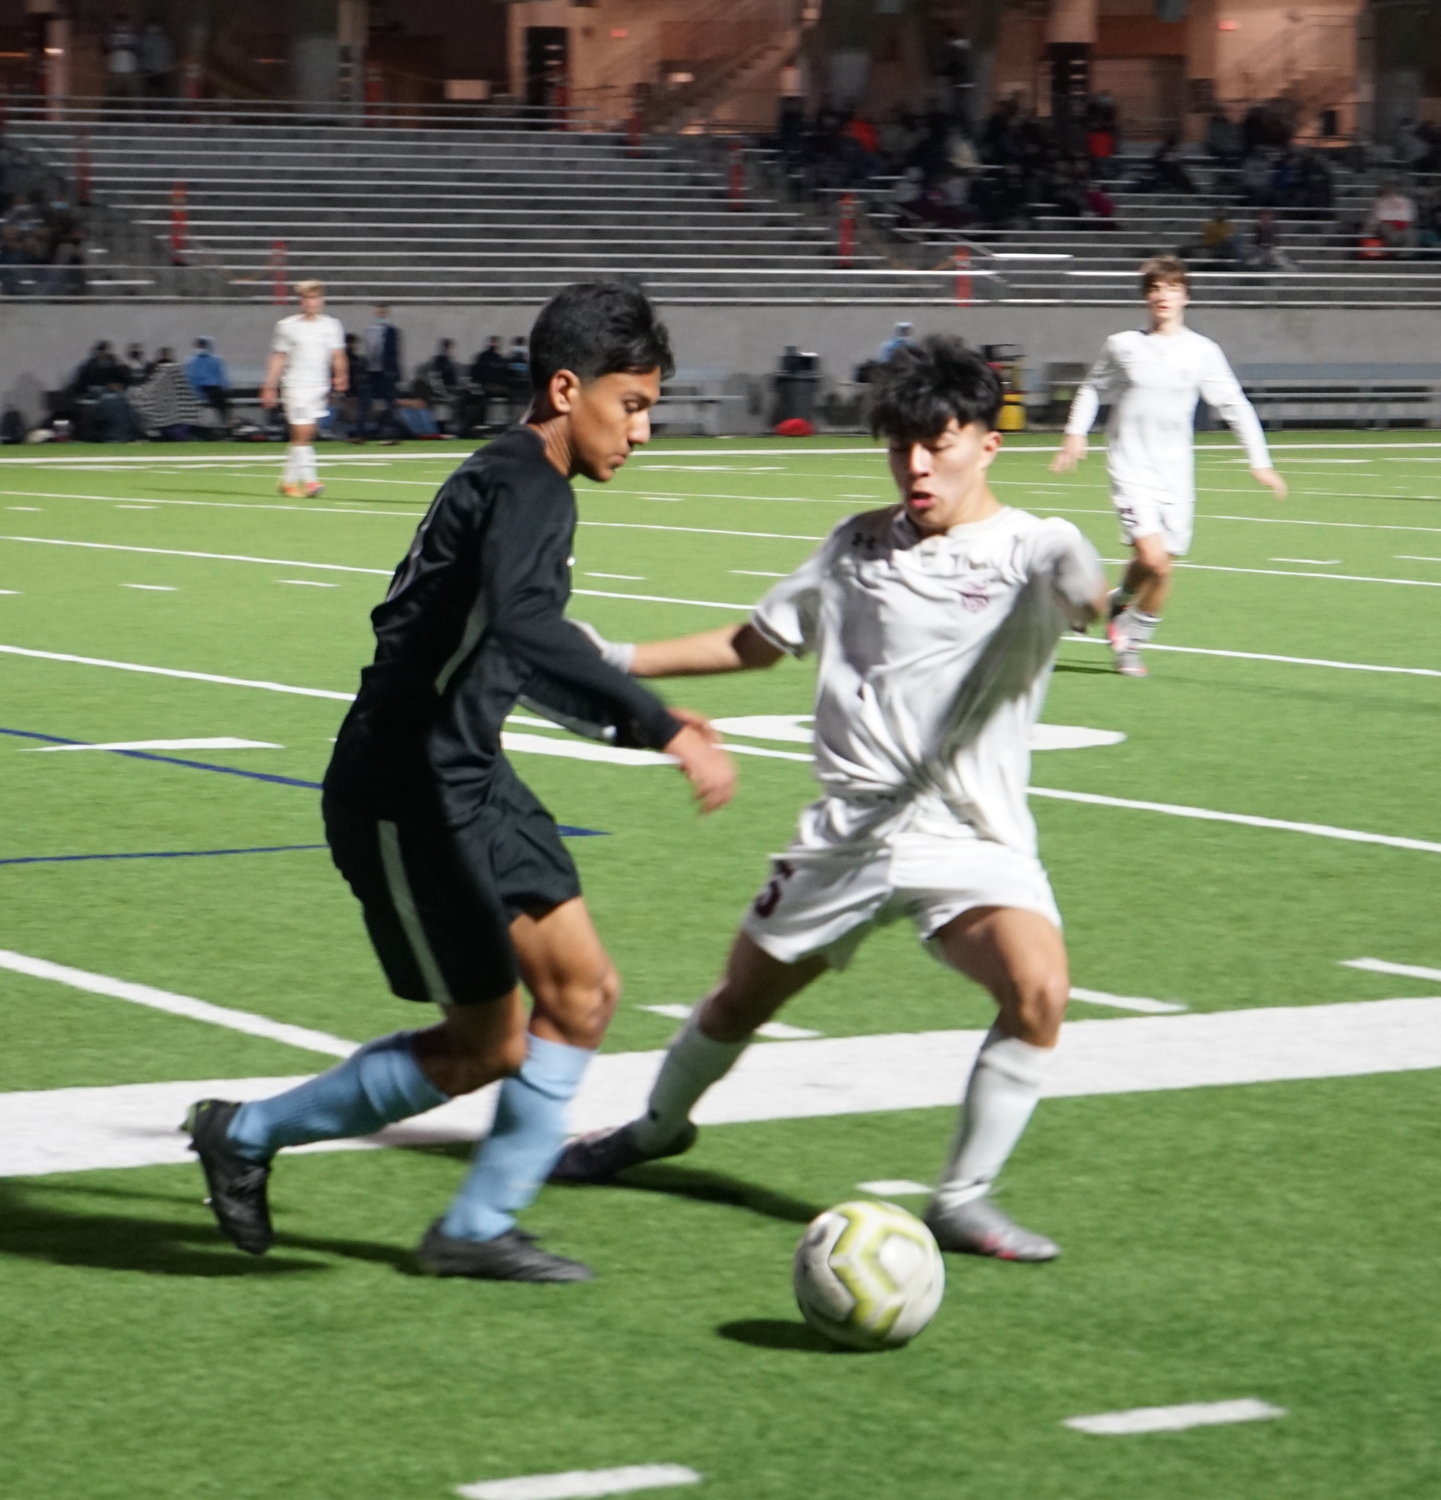 Paetow freshman Erick Tierrafria (left) competes for possession against an A&M Consolidated player during a District 19-5A game Friday, March 19, at Legacy Stadium.